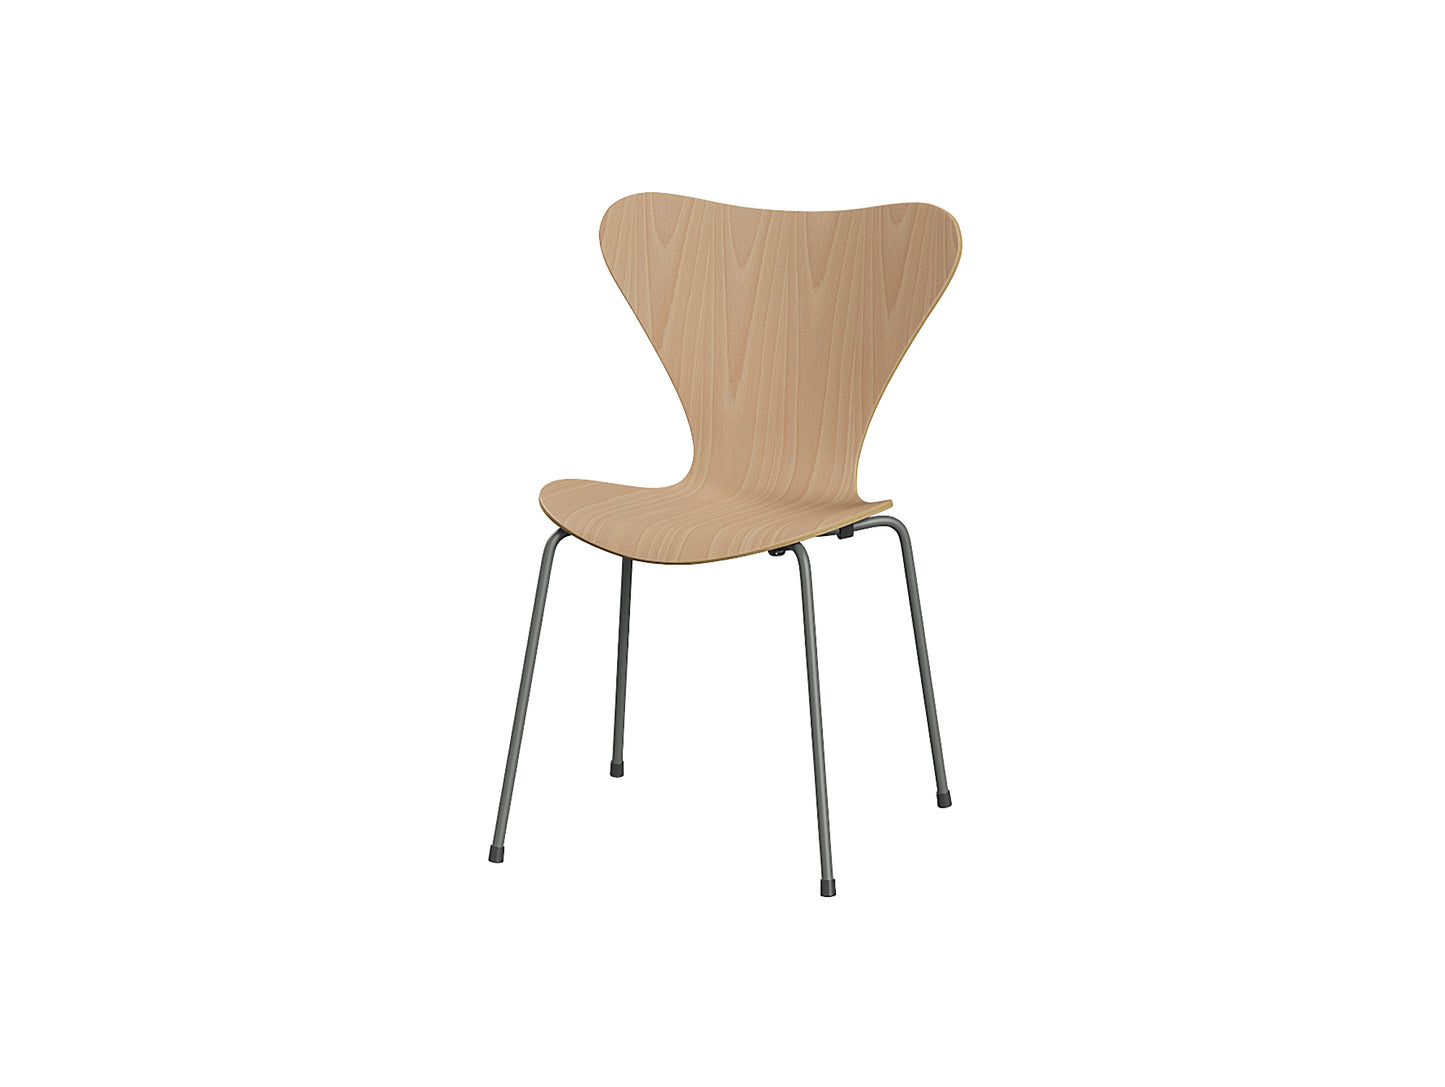 Series 7 Dining Chair (Clear Lacquered Wood) by Fritz Hanse - Beech / Silver Grey Steel